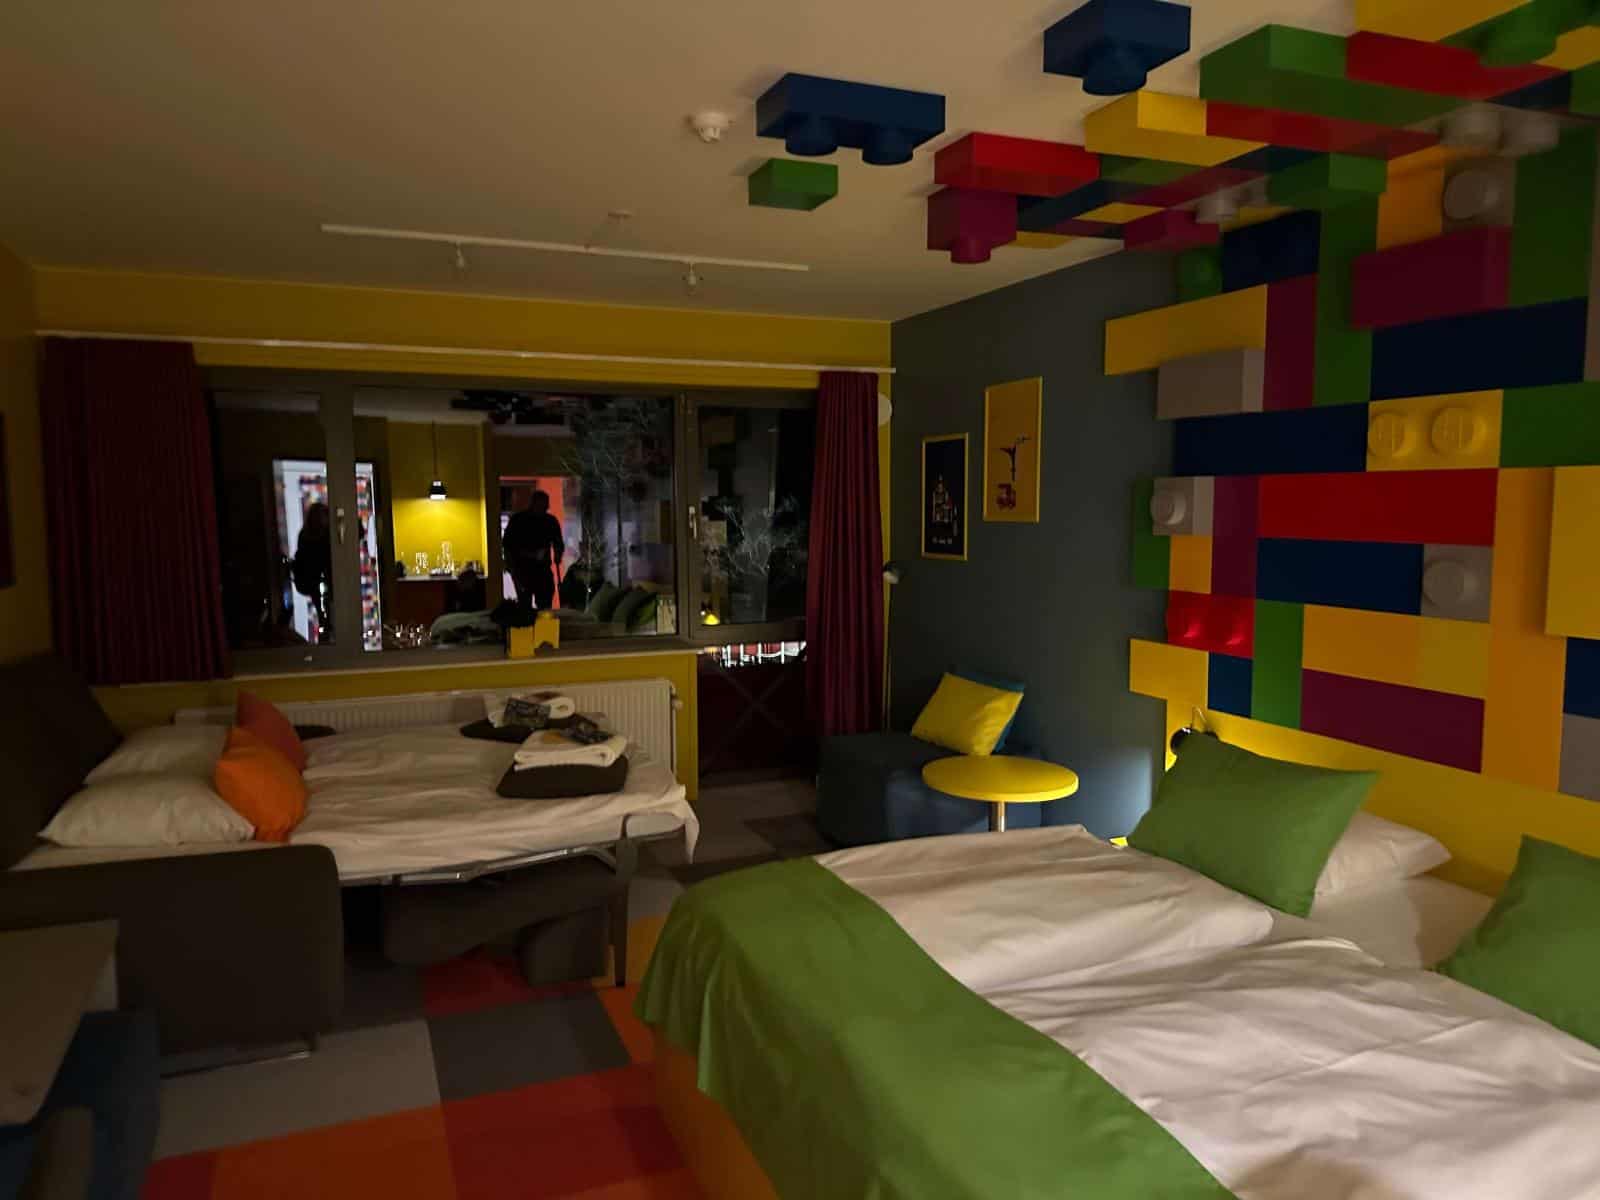 View of a room in the Legoland Hotel Billund with bricks